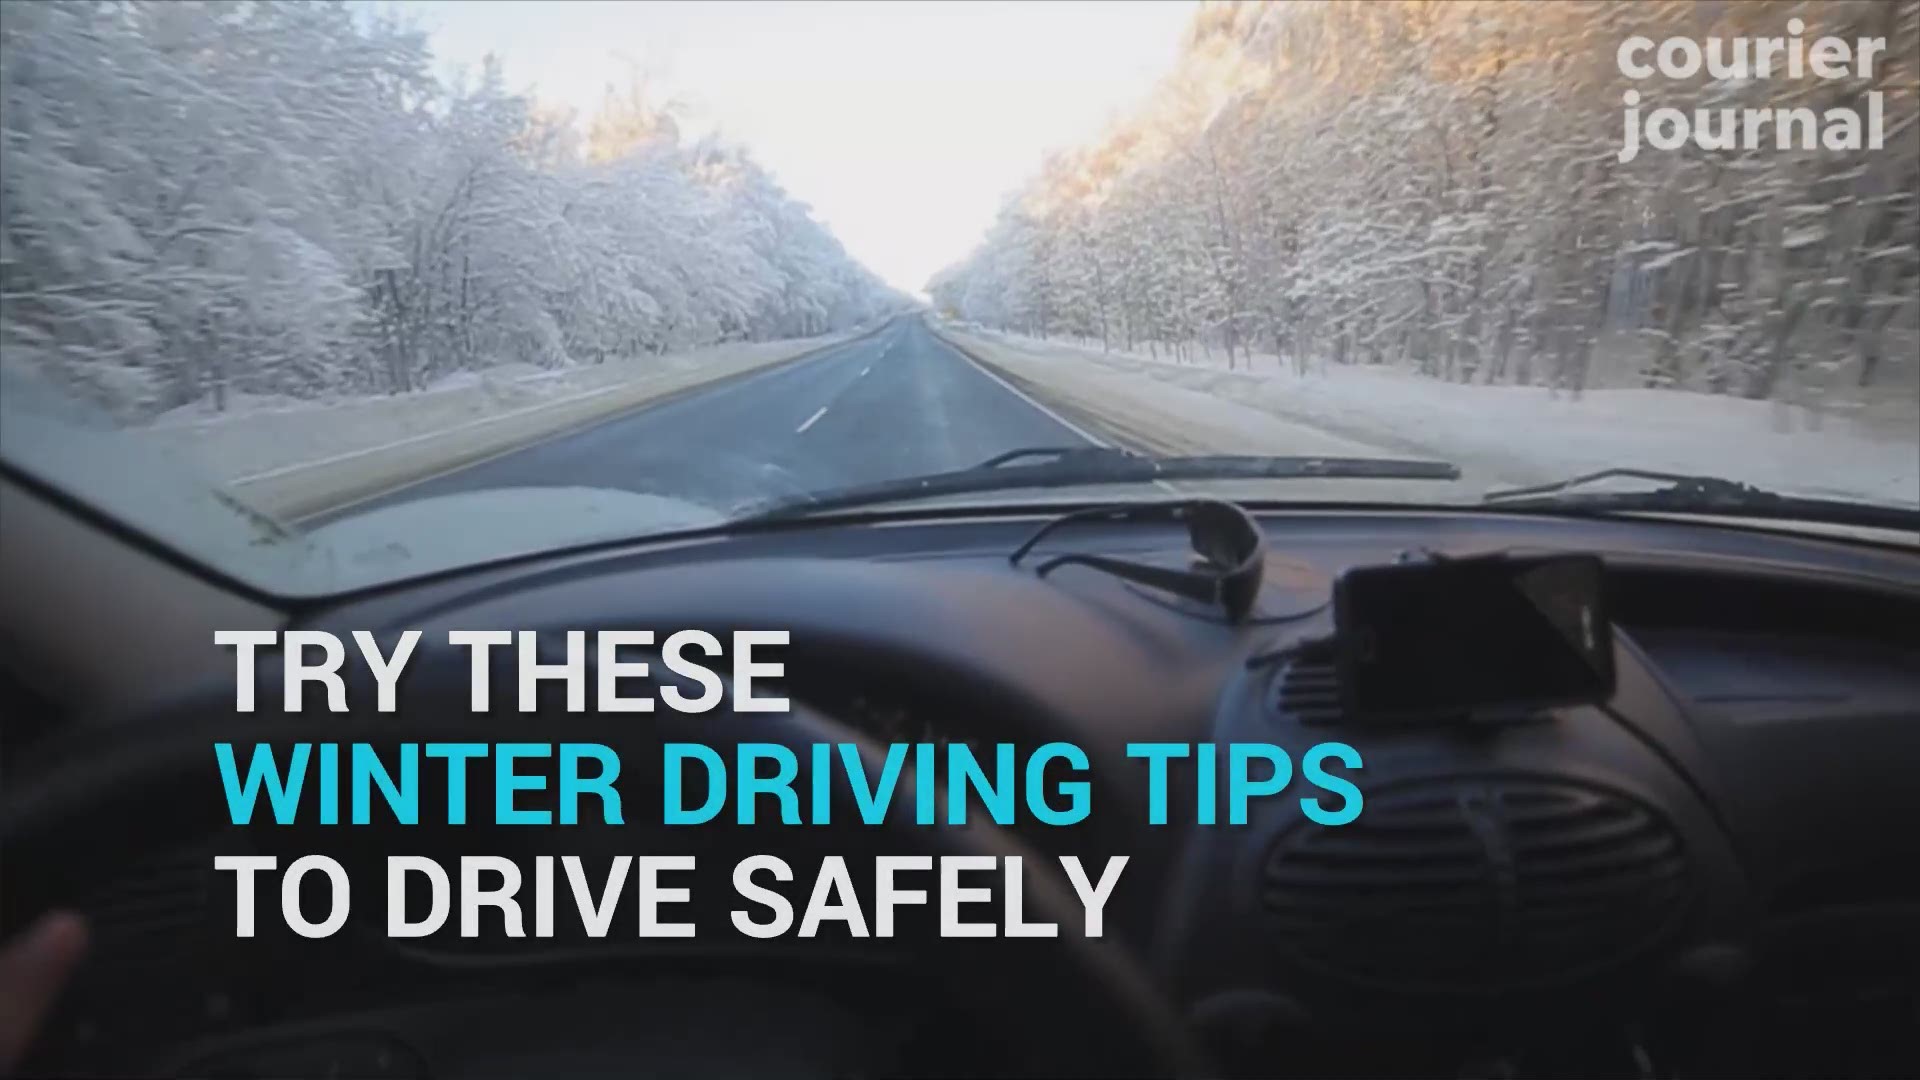 Be safe out on the road! Here are some tips on how to drive in snow.